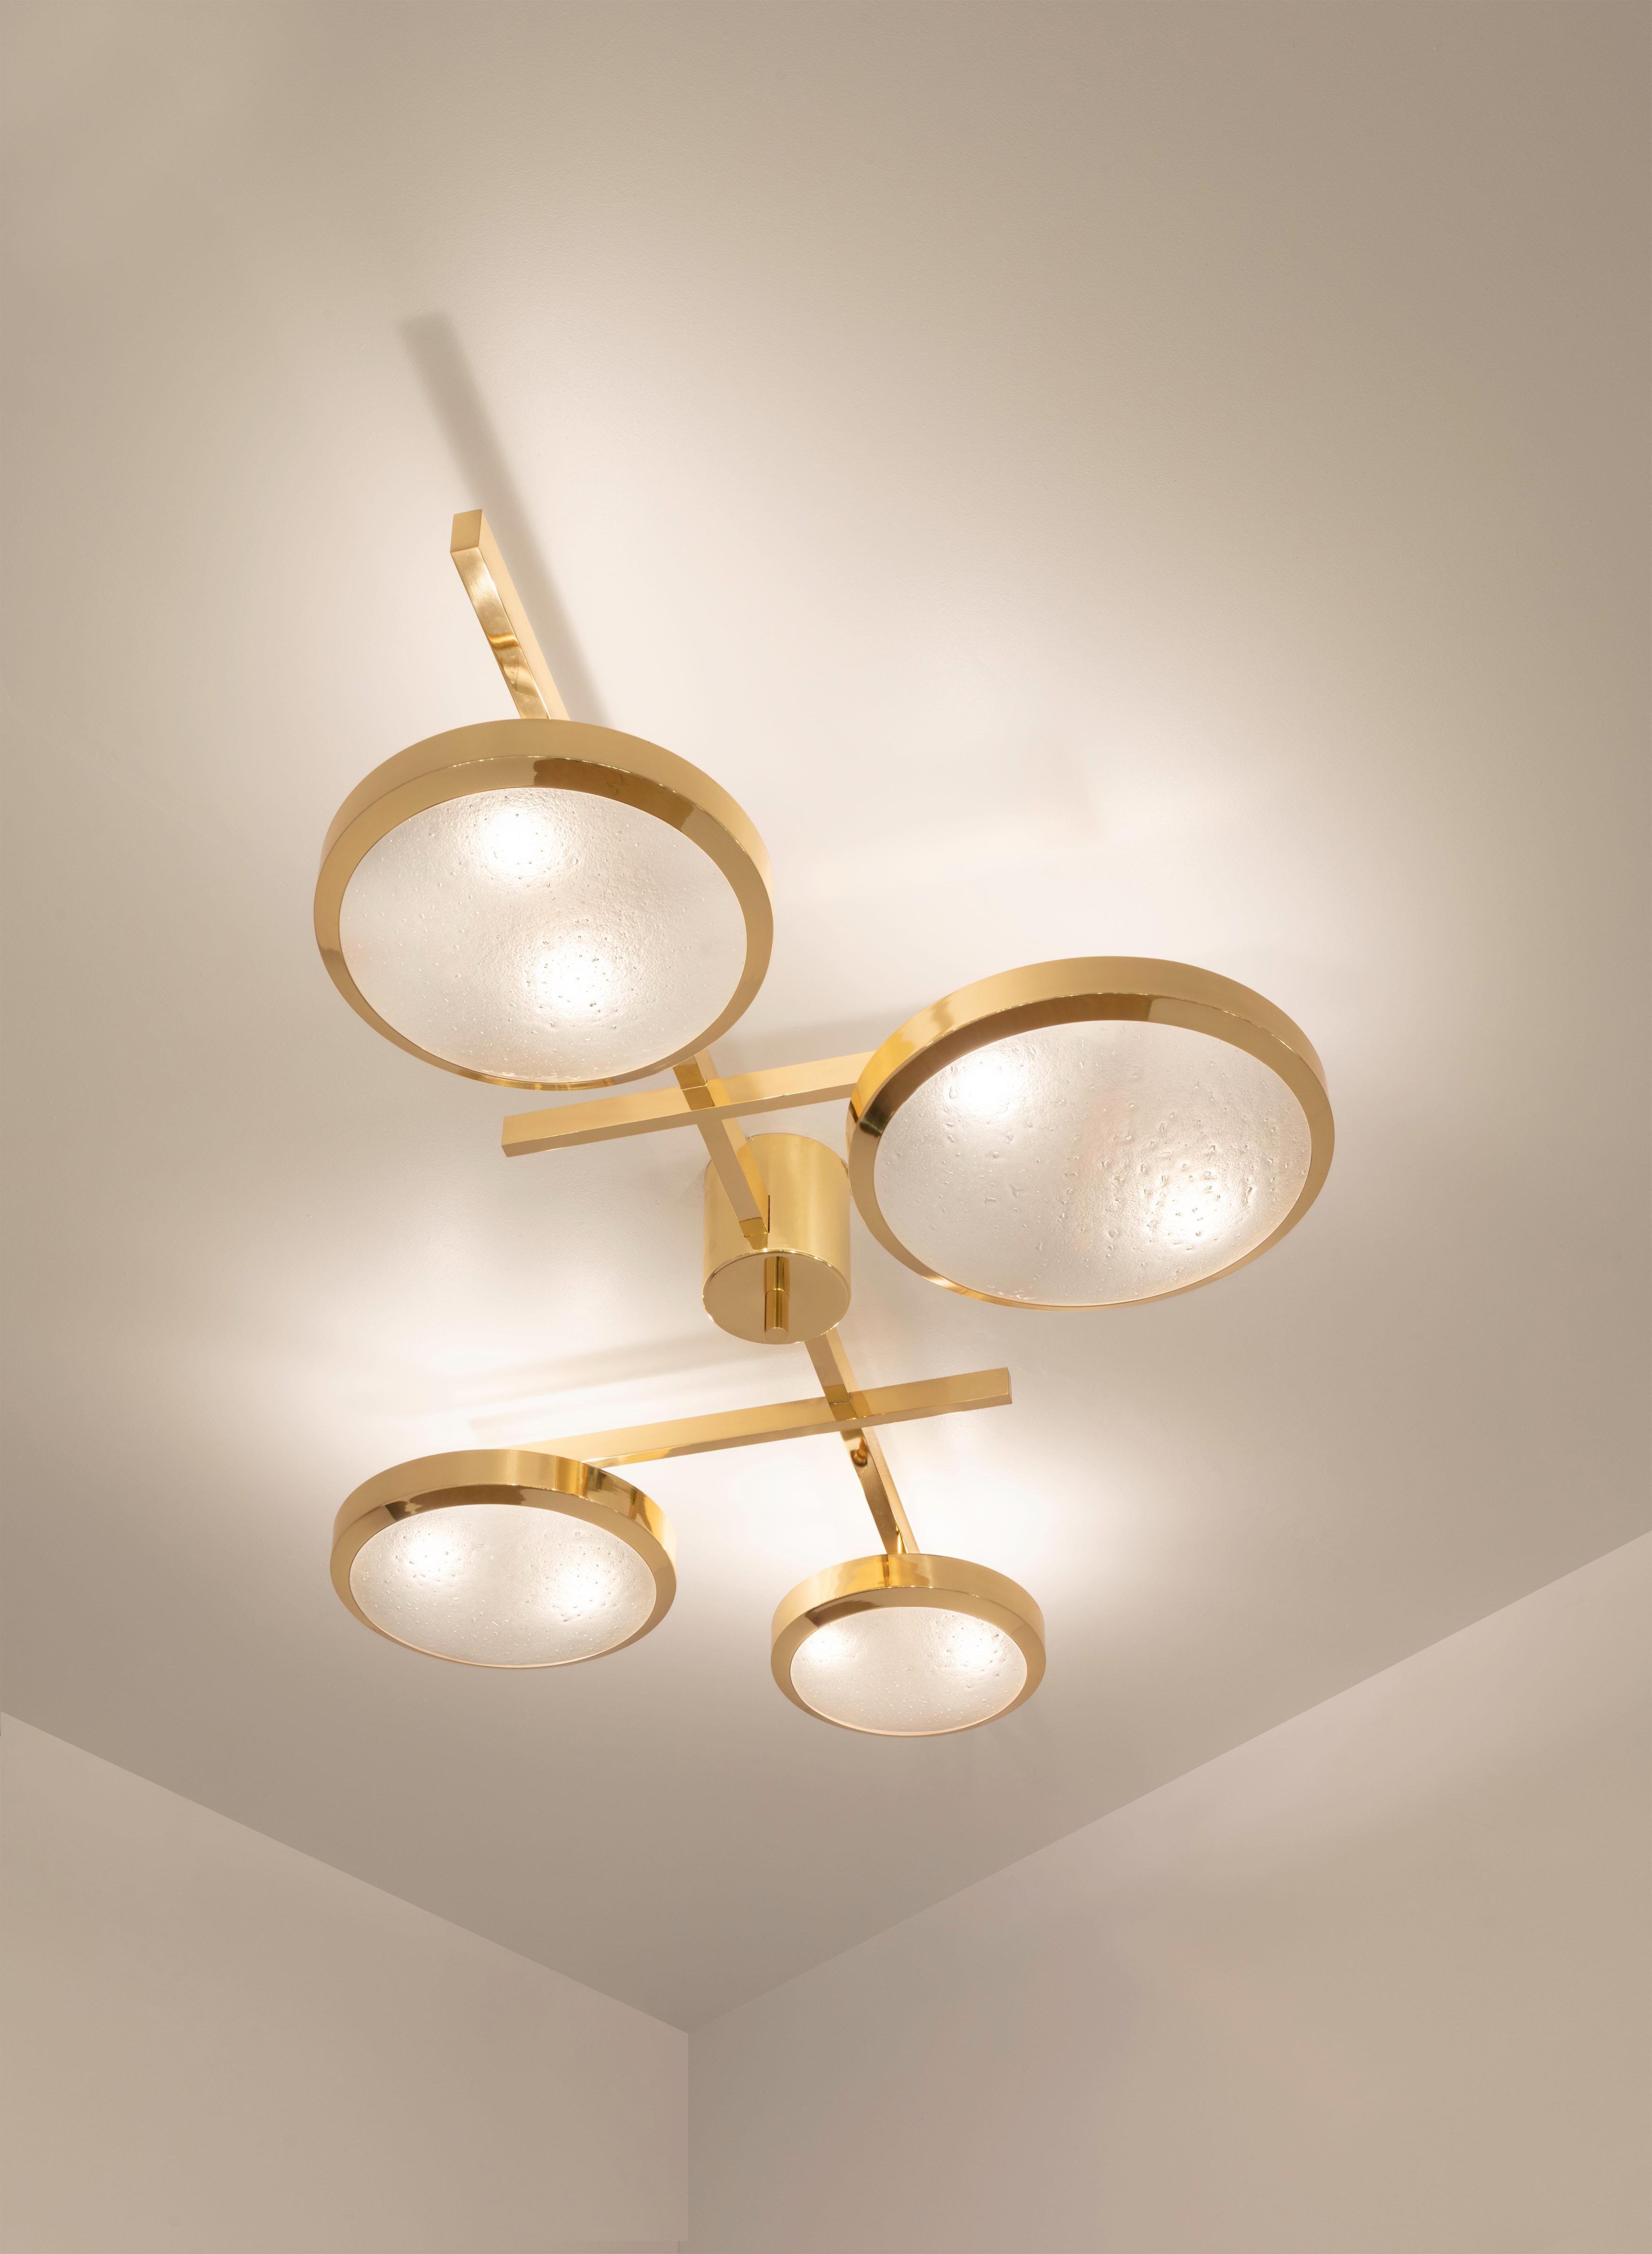 Tetrix Ceiling Light by Gaspare Asaro- Satin Nickel Finish For Sale 2